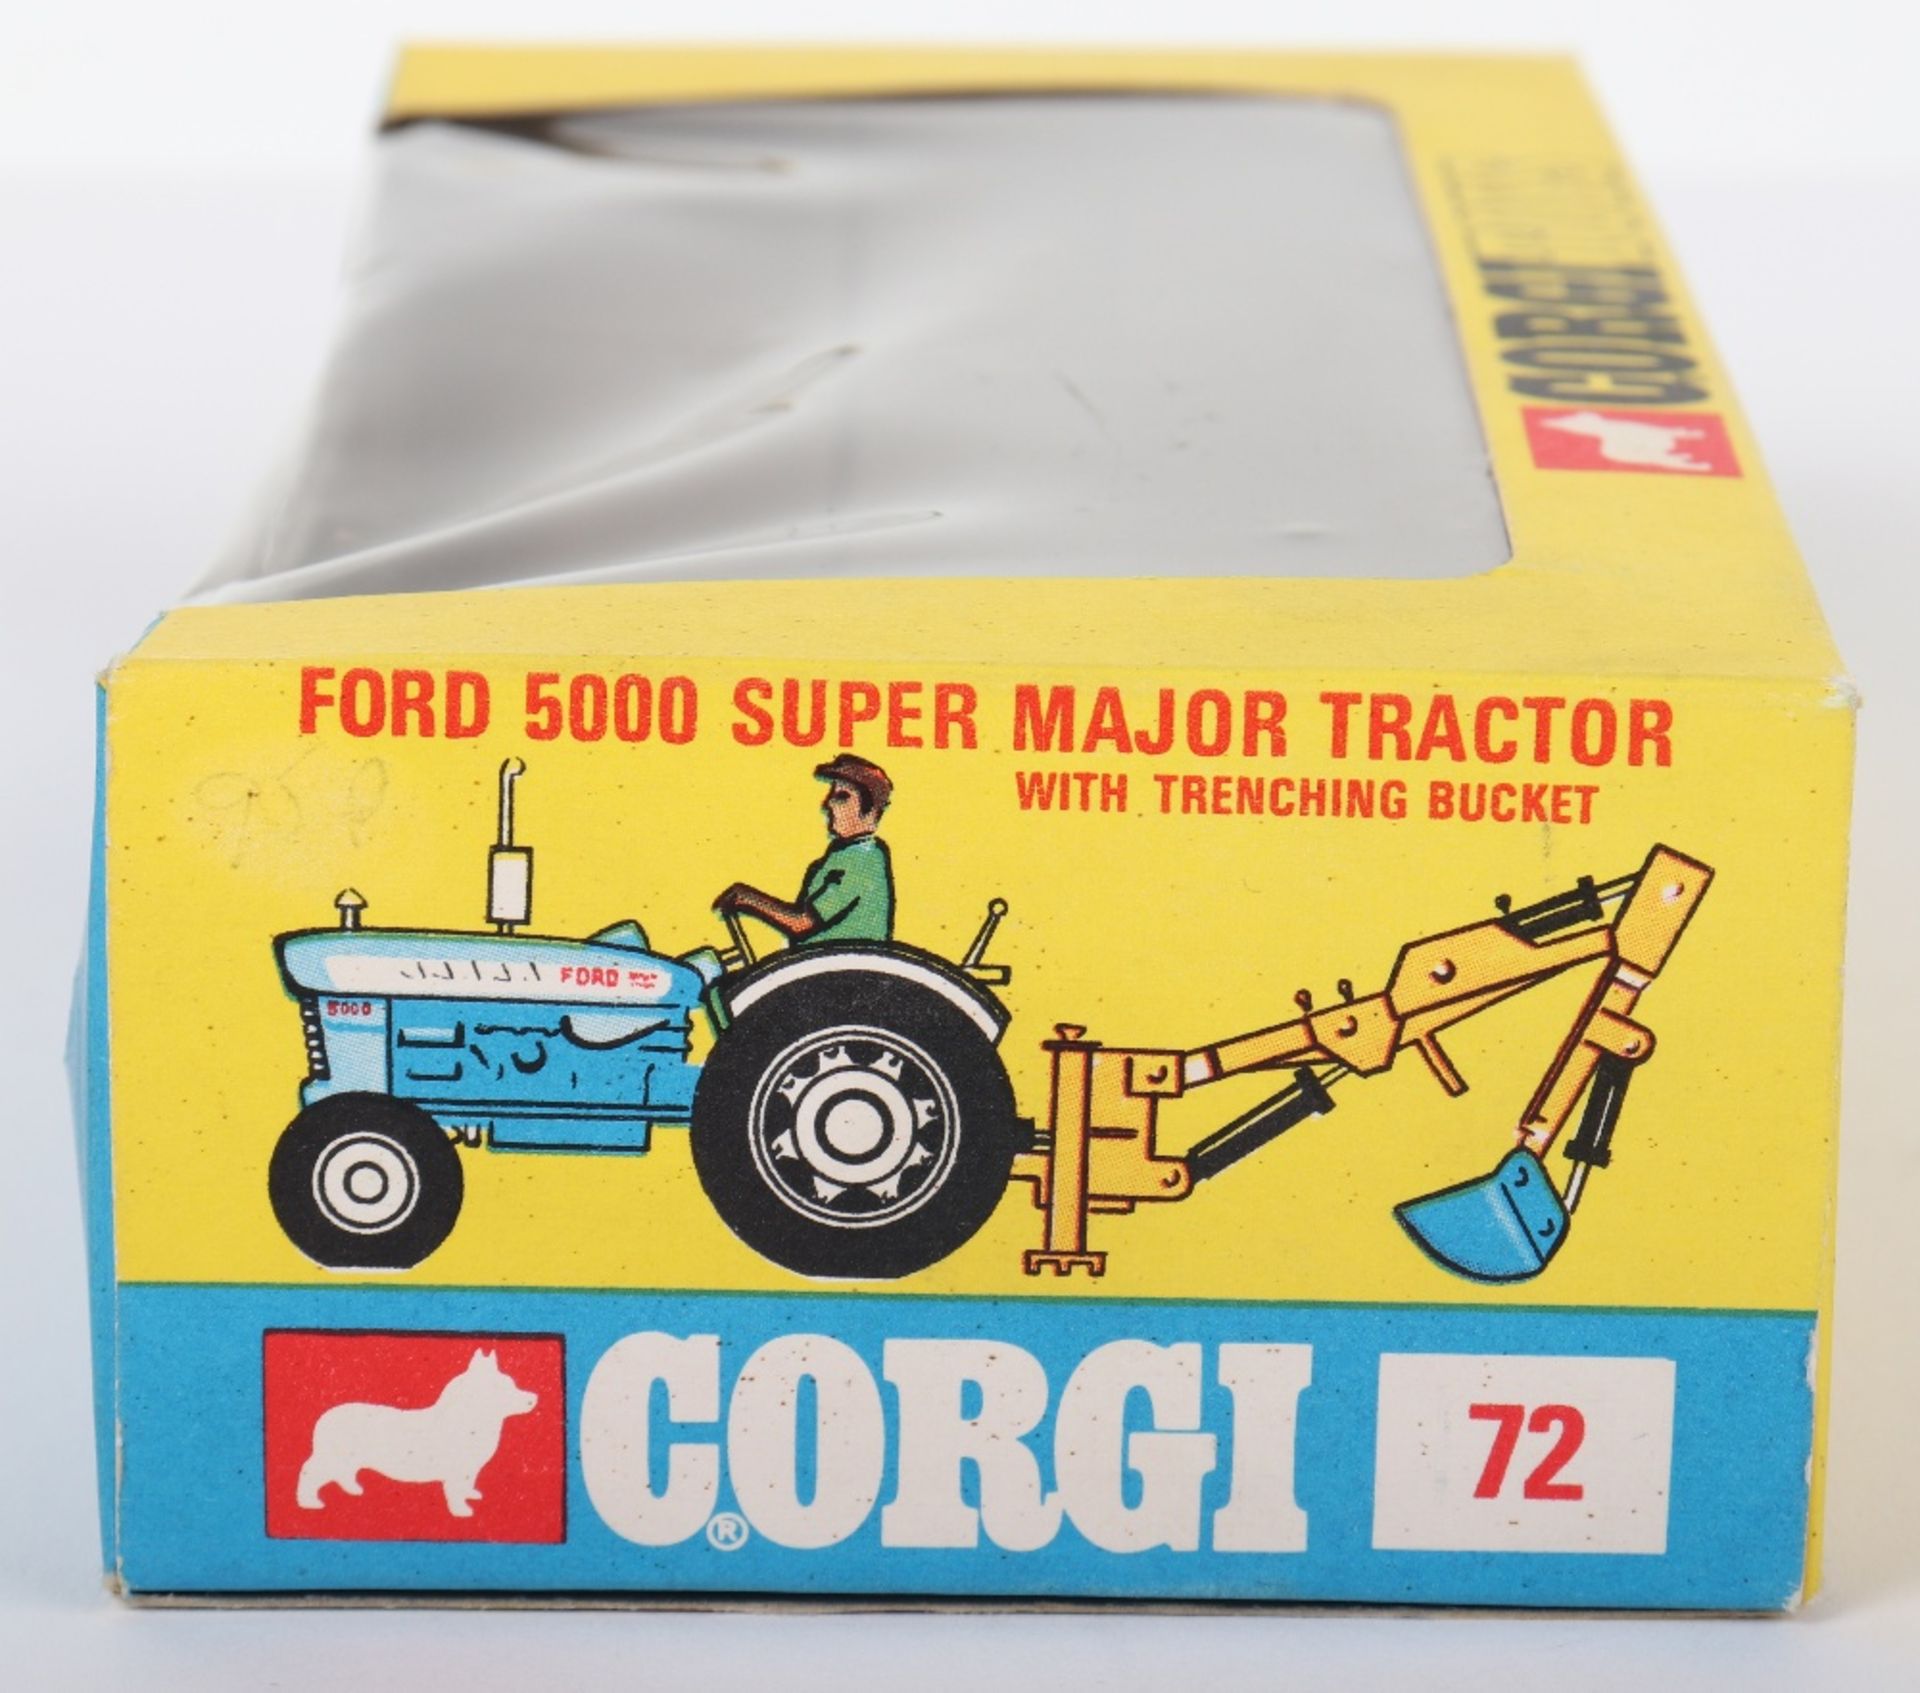 Scarce Corgi Toys 72 Ford 5000 Super Major Tractor With Trenching Bucket - Image 4 of 5